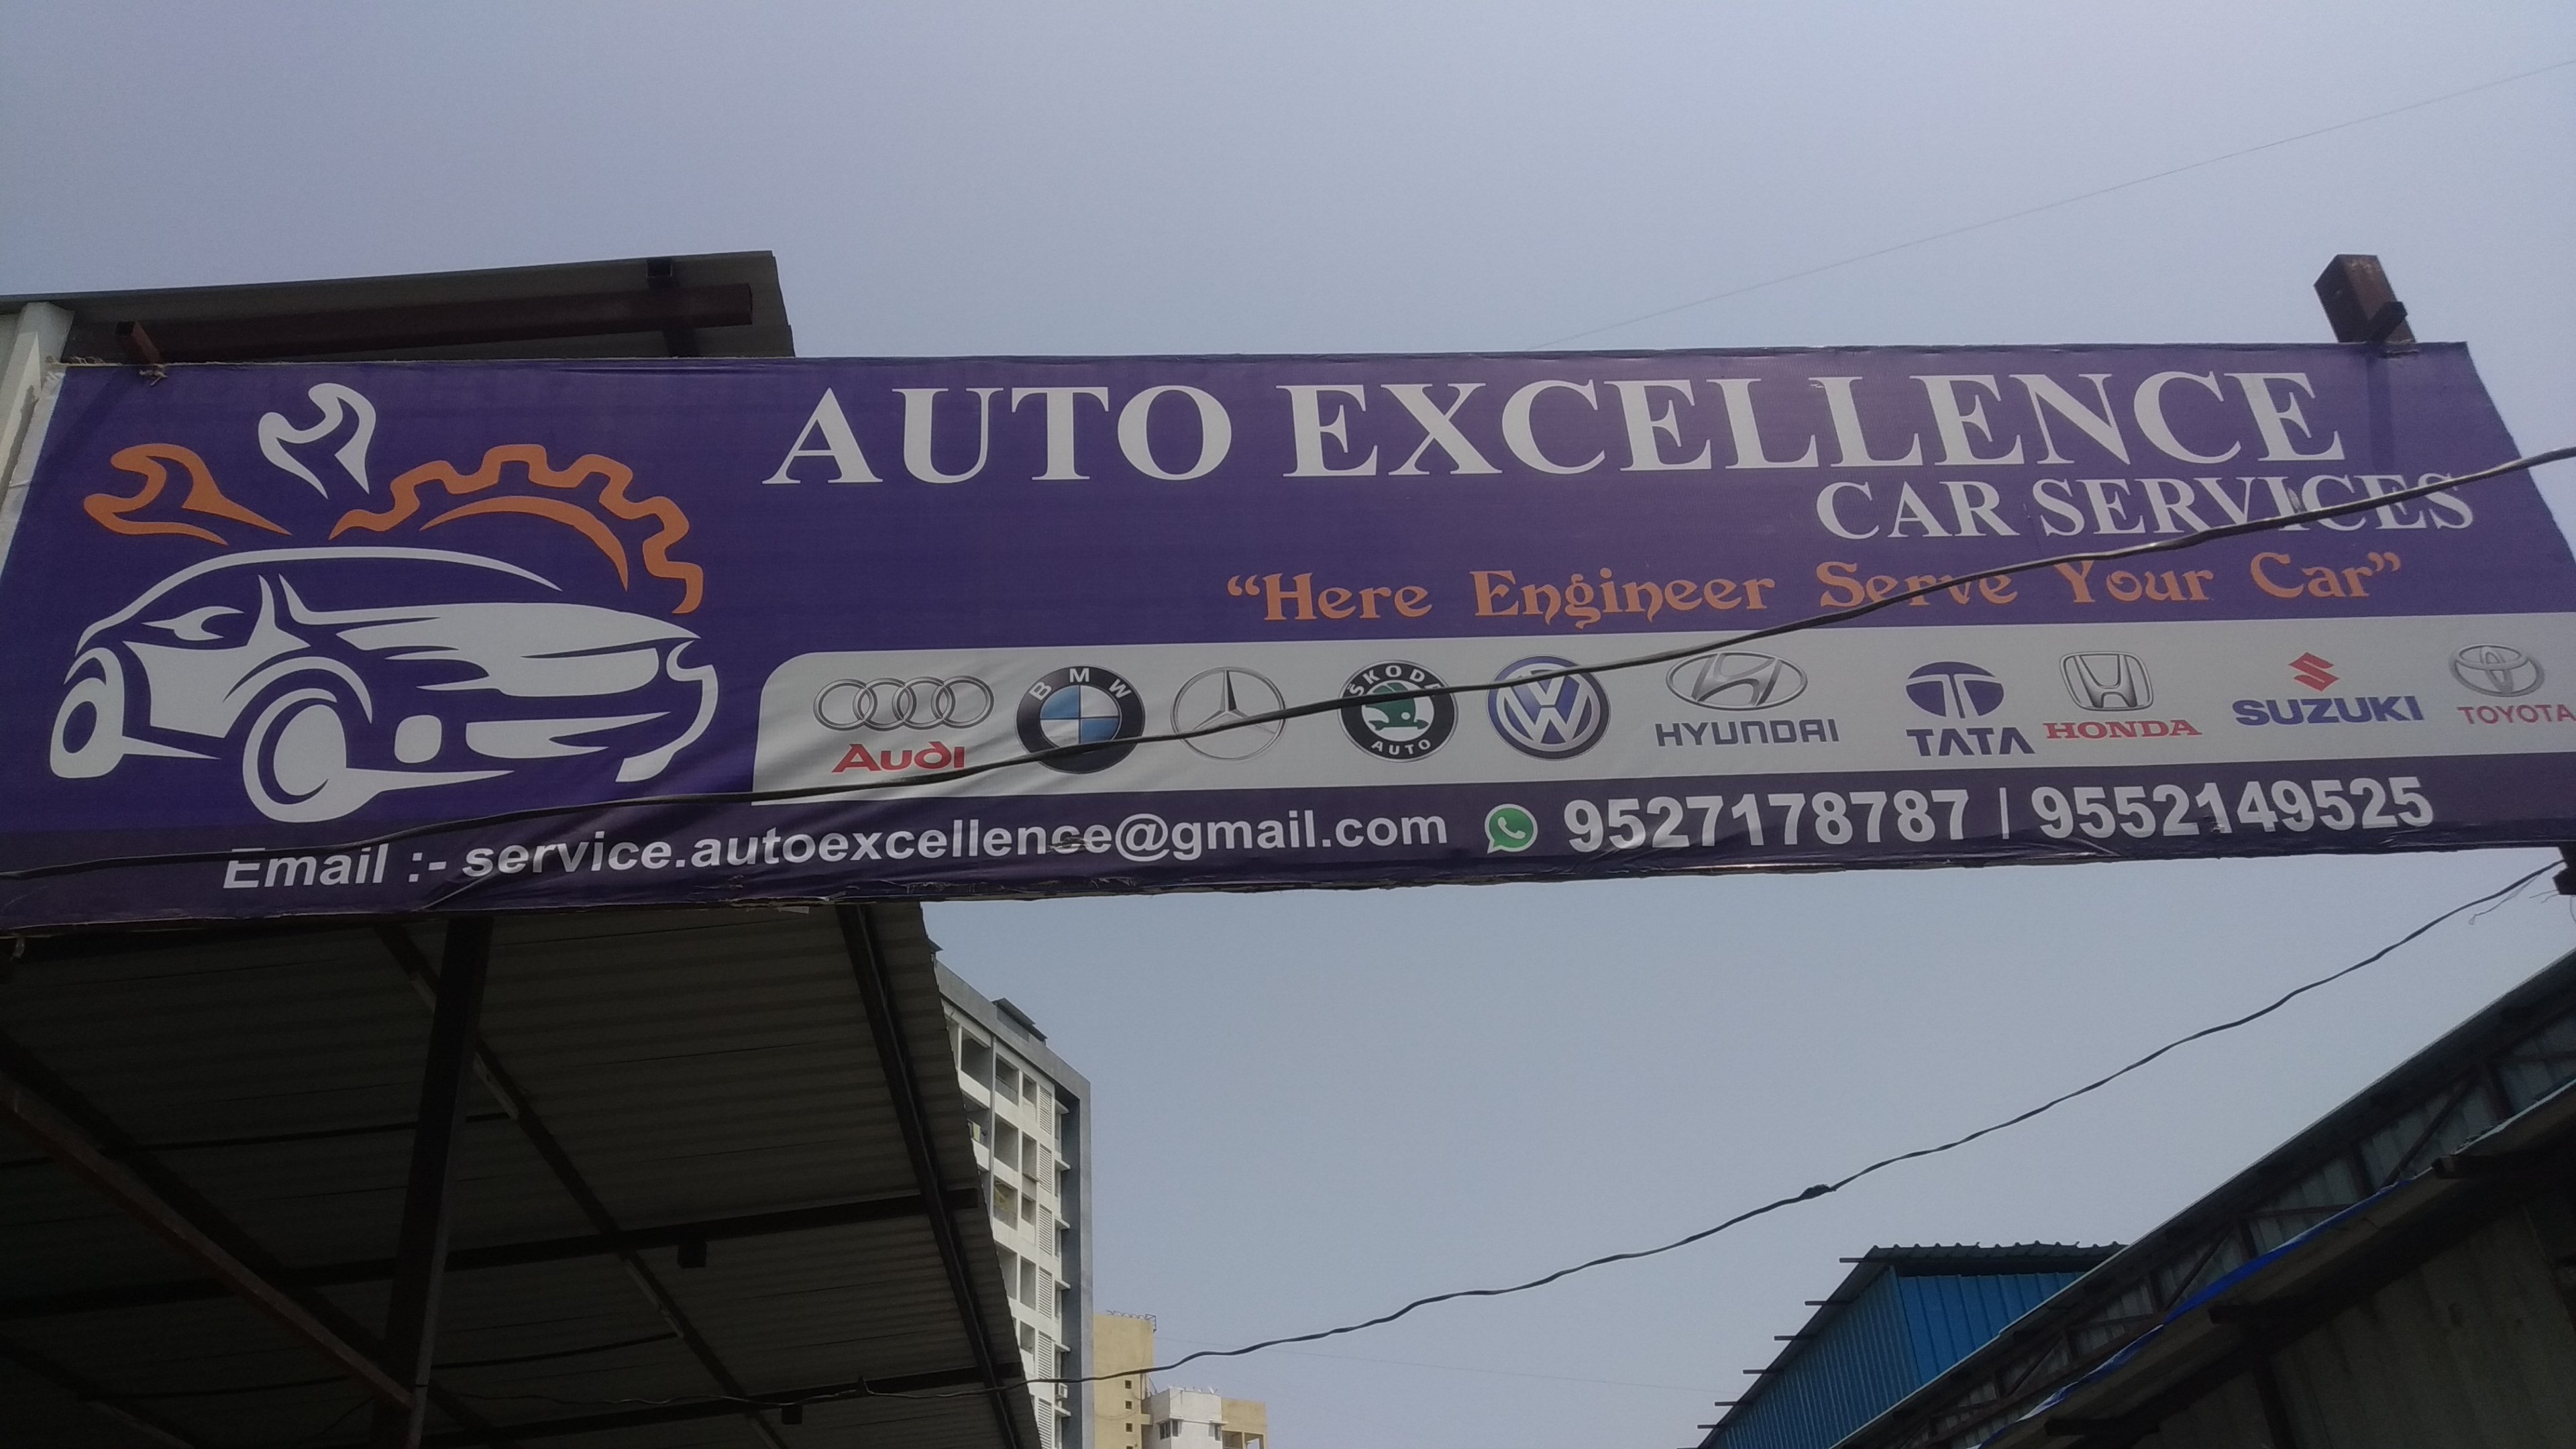 Auto Excellence Car Services  in Khardi Pune at Affordable Price